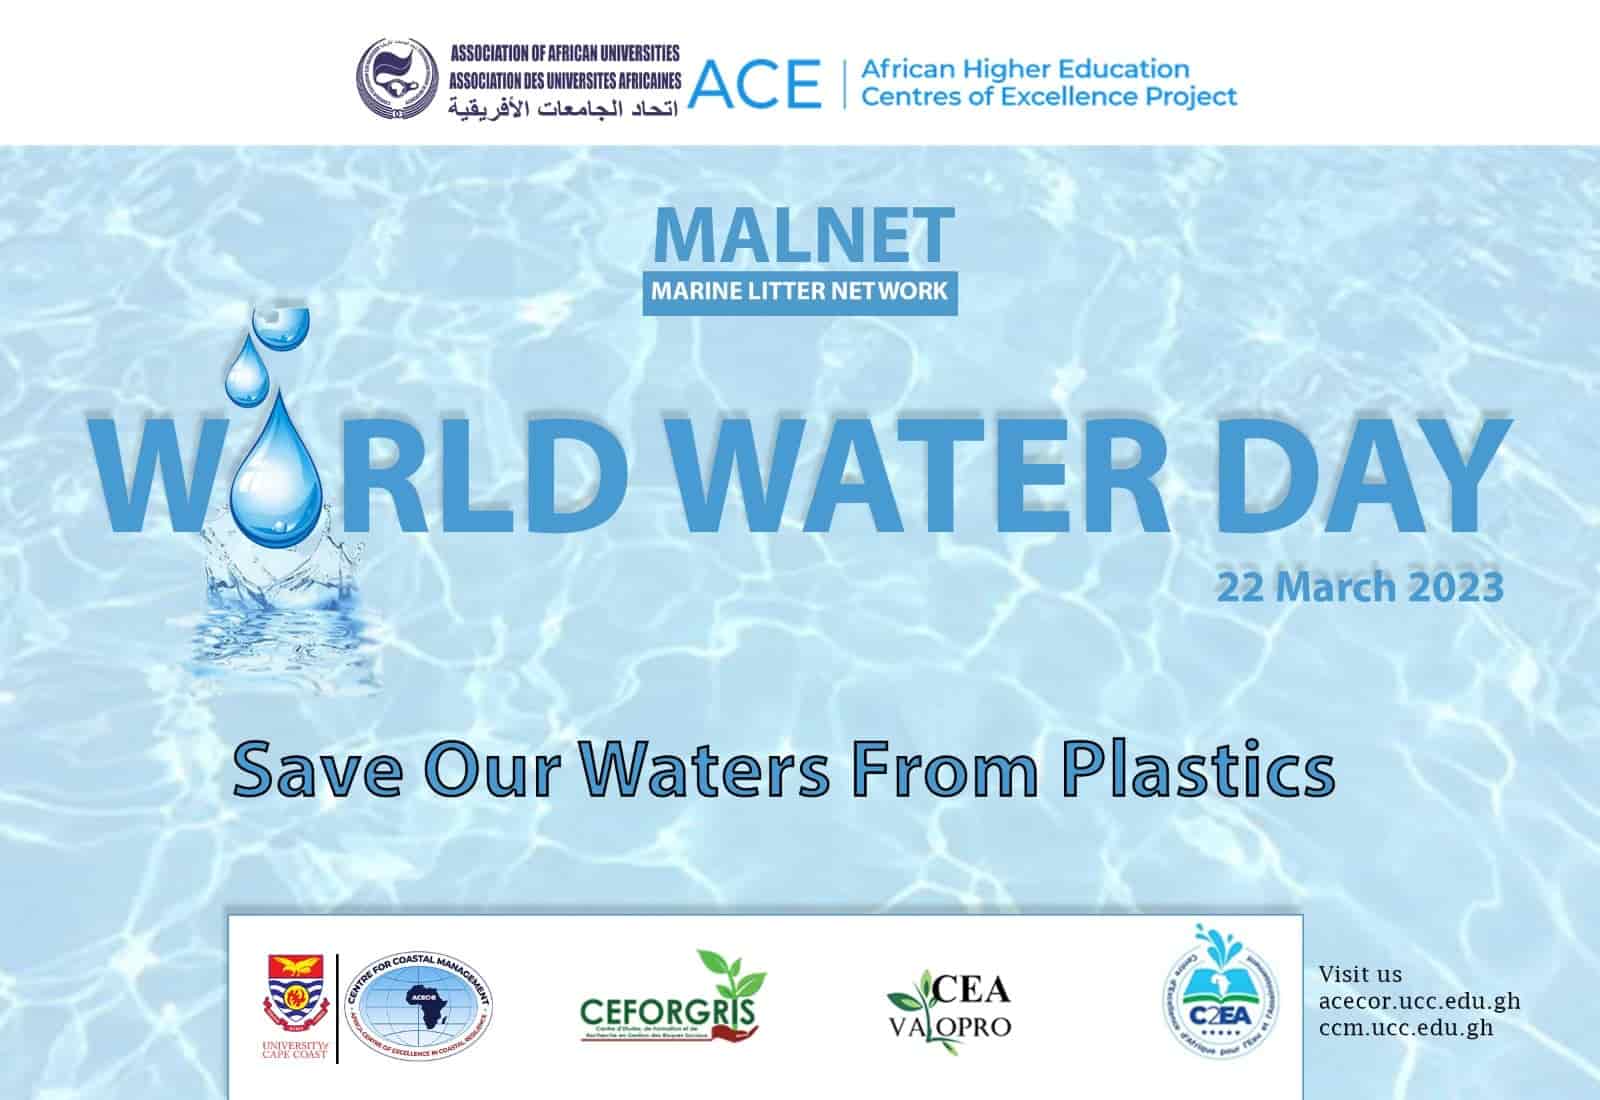 Today is World Water Day